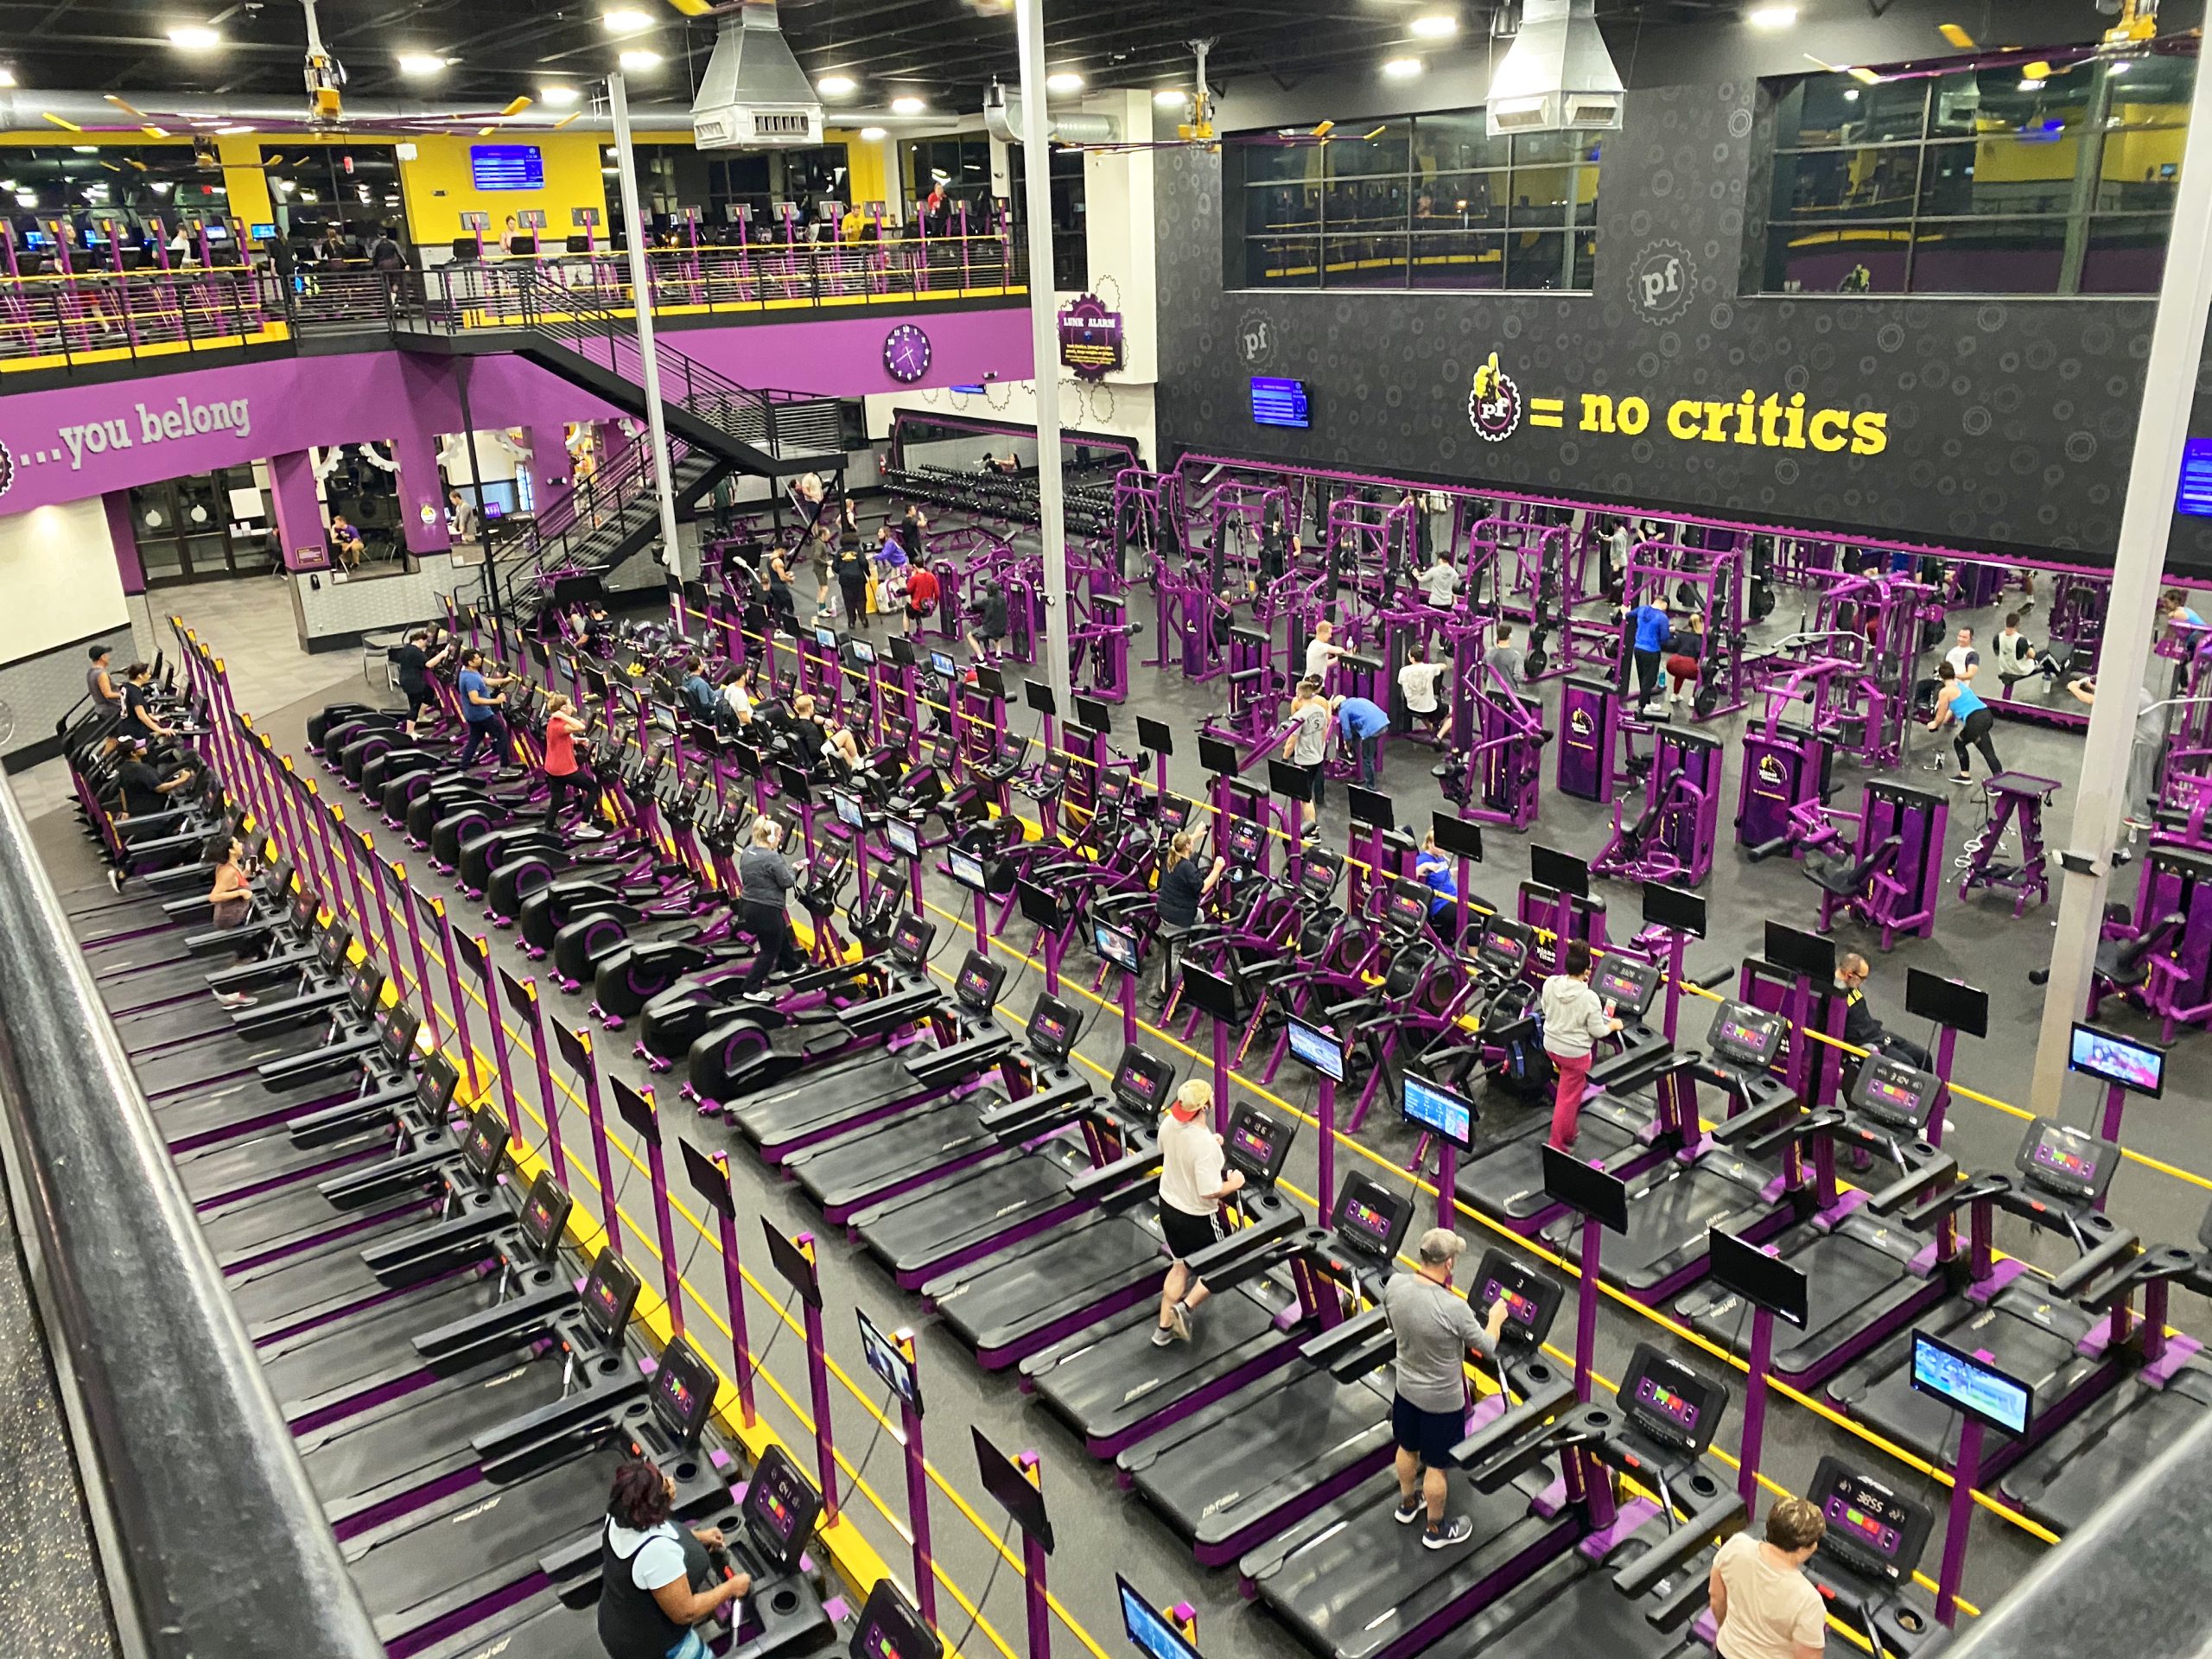 After 30 Years Planet Fitness Membership Fees Still Remain $10